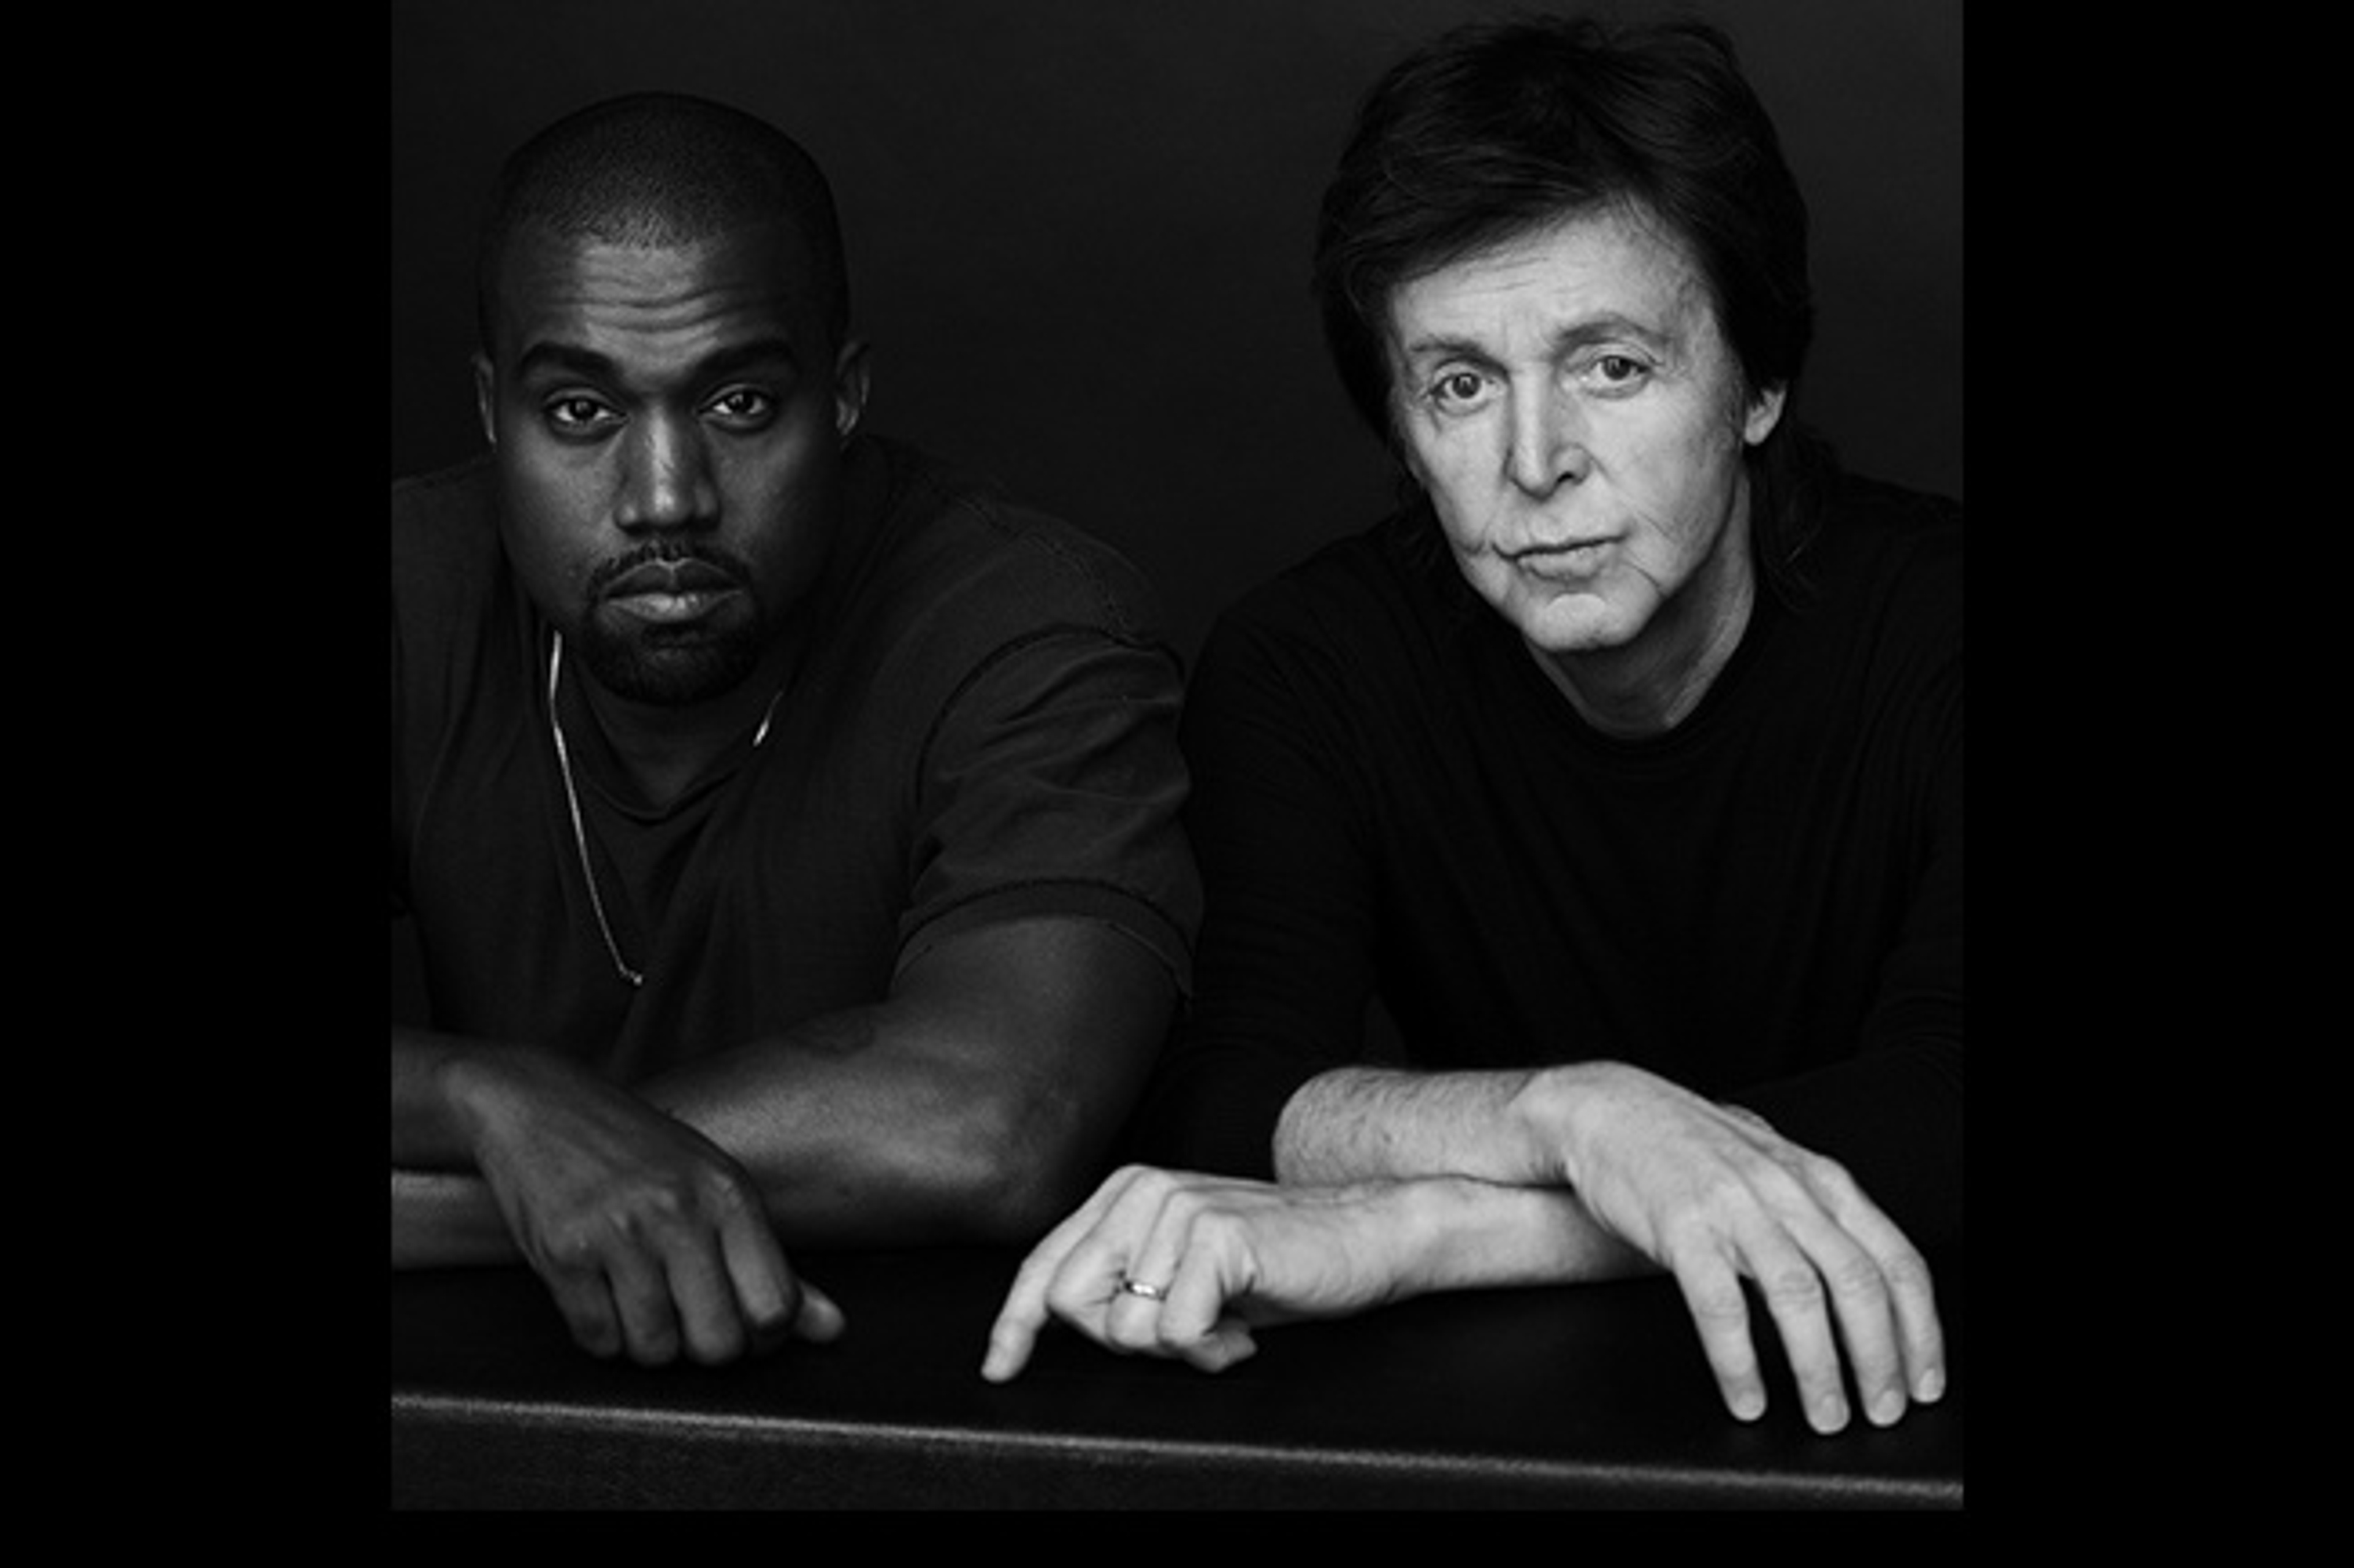 Listen: 'Only One' by Kanye West featuring Paul McCartney